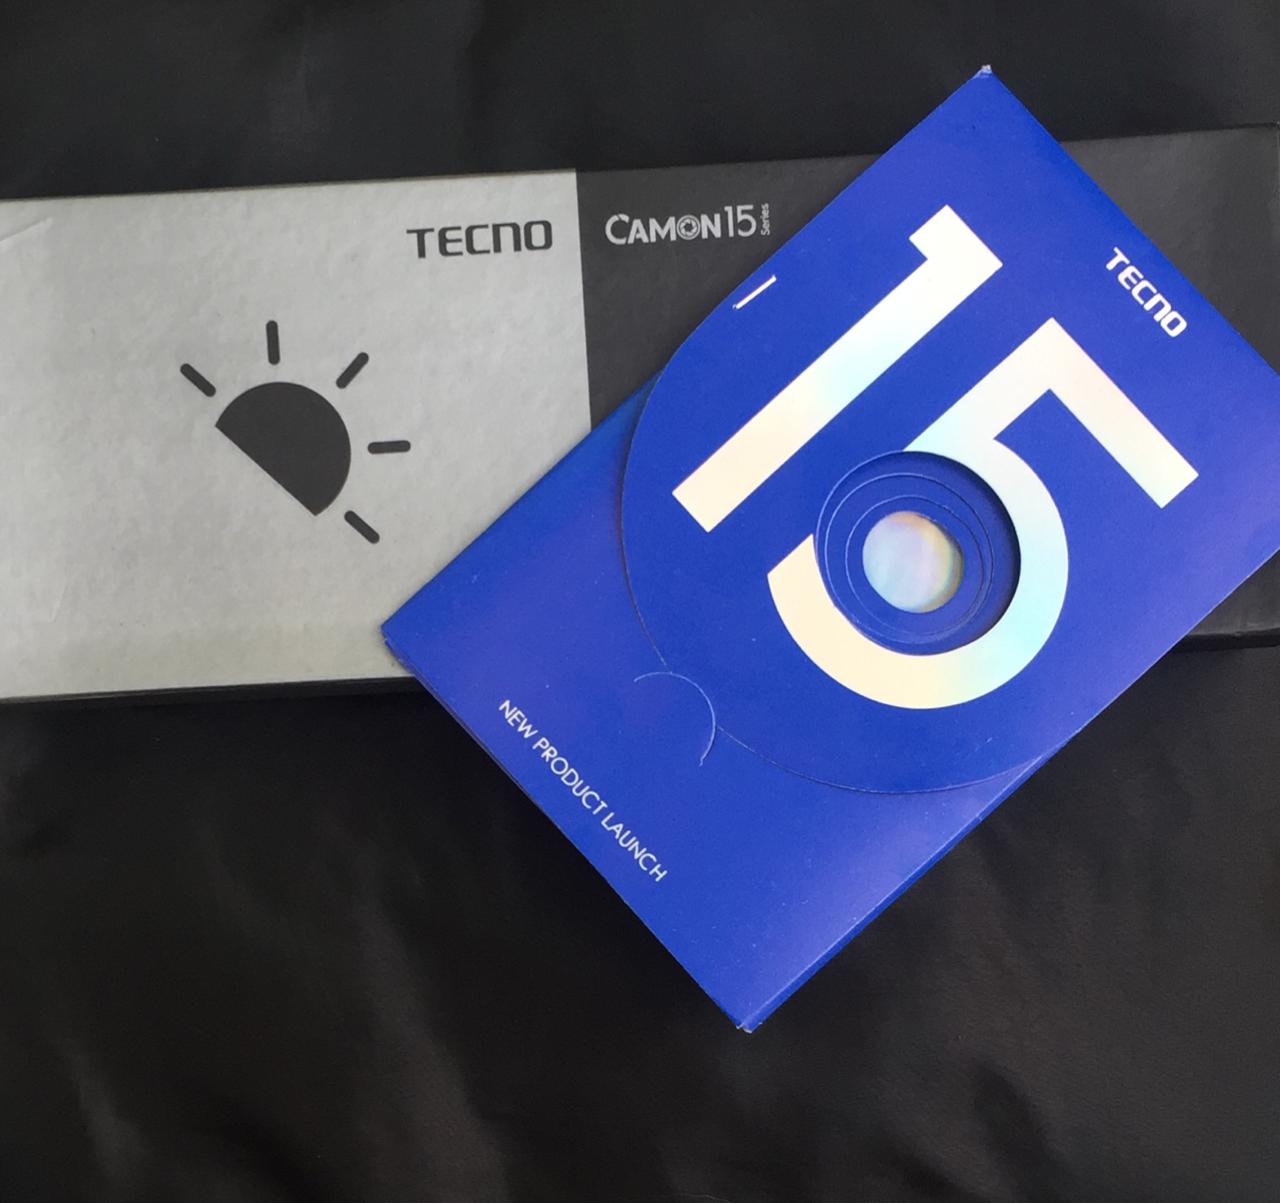 TECNO to Livestream ‘Camon 15’ Phone Launch on March 24